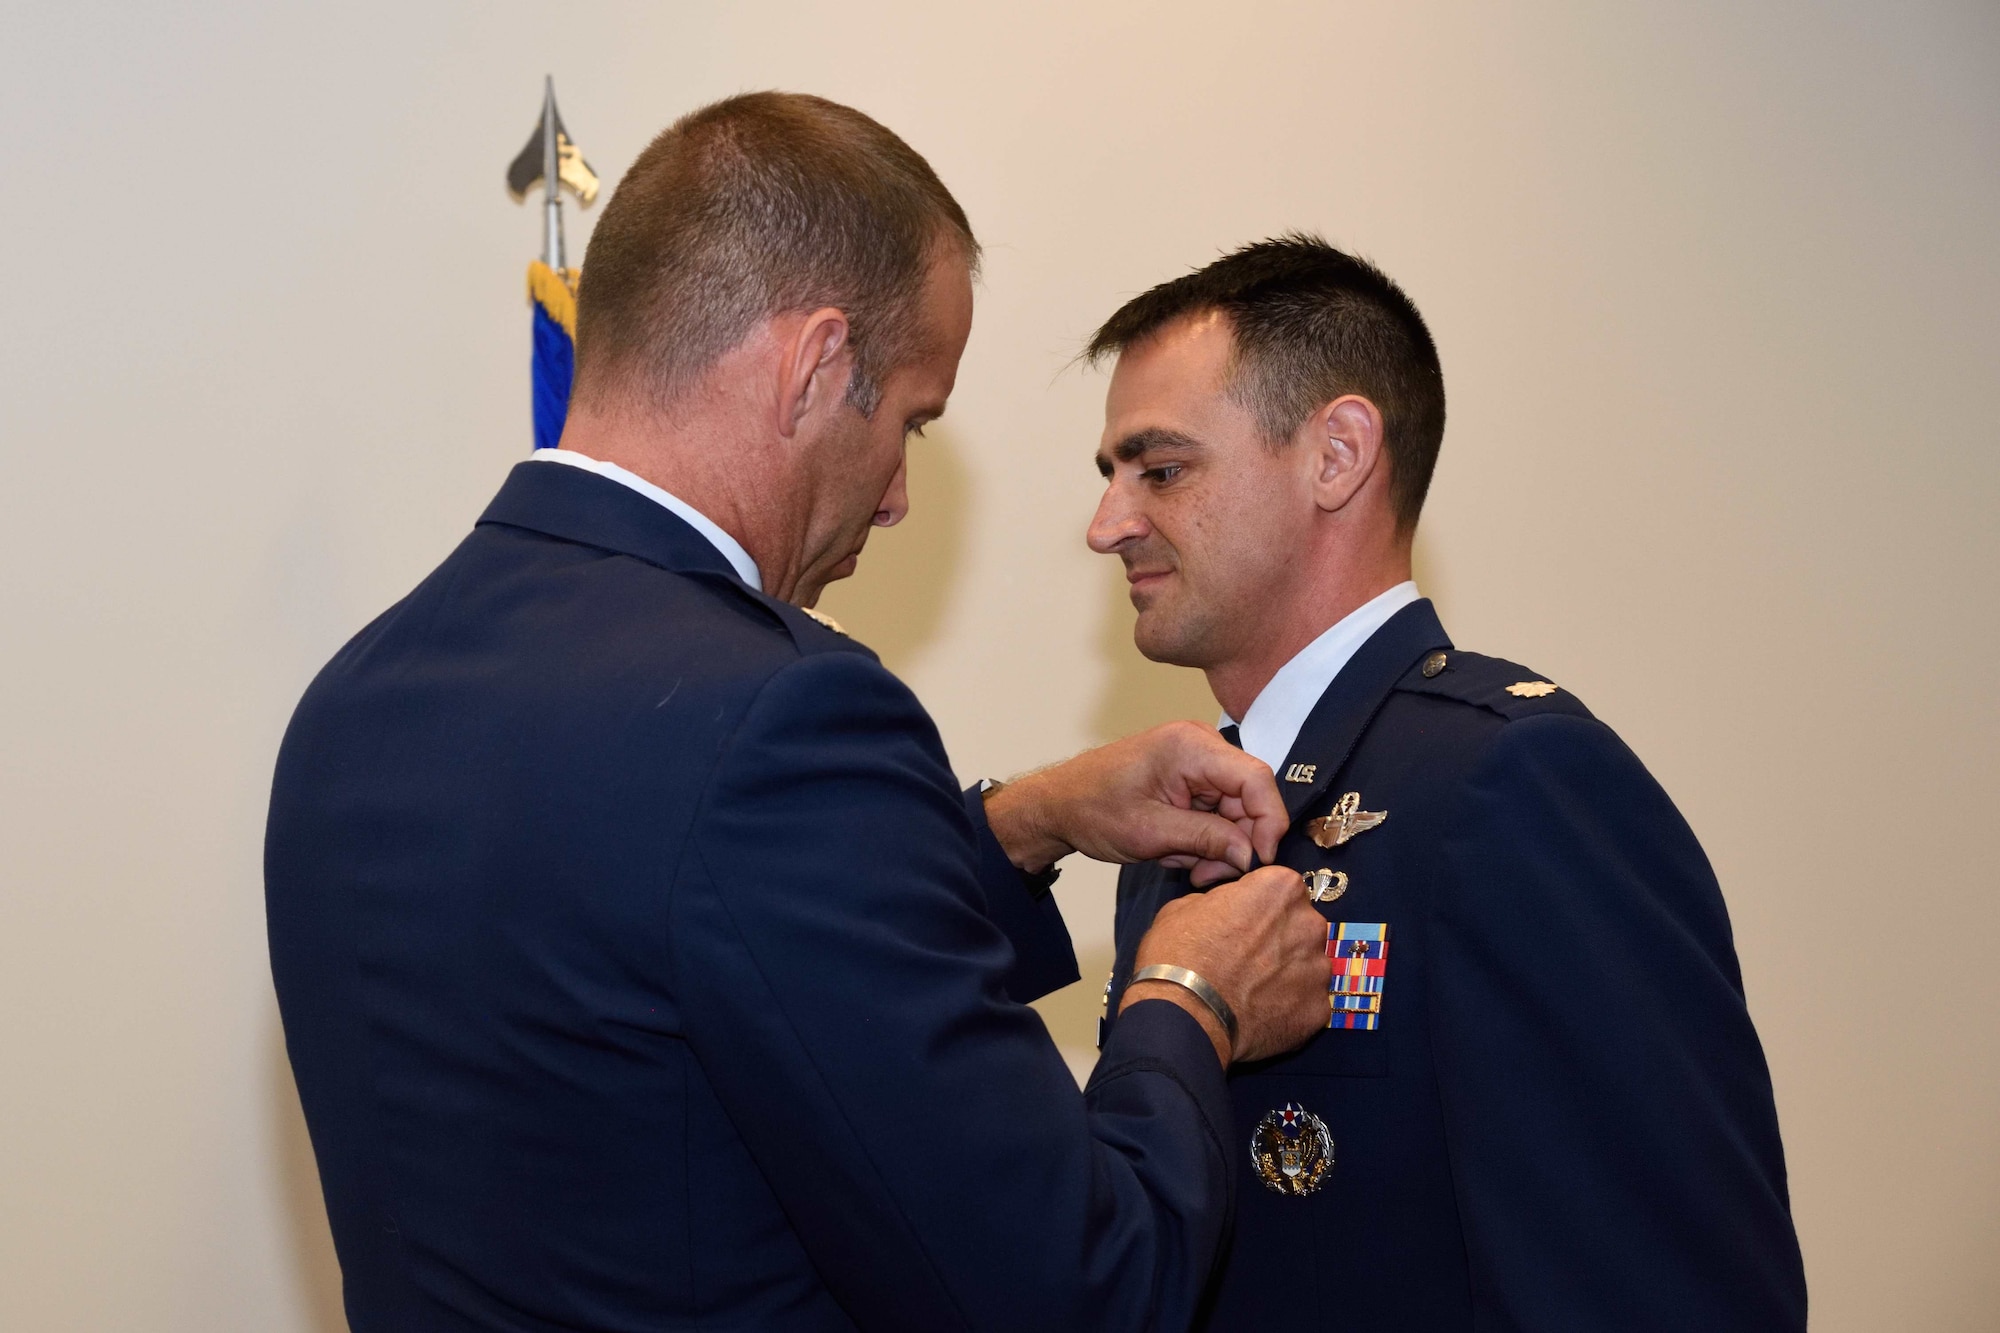 Lt. Col. (retired) Matthew Wehner (left) clips the Meritorious Service Medal to Lt. Col. Stuart M. Rubio, commander of the Air Force Reserve’s 815th Airlift Squadron “Flying Jennies” during Rubio’s retirement ceremony held July 28, 2018, at the Roberts Consolidated Maintenance Facility, Keesler Air Force Base, Mississippi. Rubio, an active-duty C-130 pilot who has been commander of the Flying Jennies since February of 2016, will still continue to serve as commander of the squadron, but instead as a reservist as part of the Regular Air Force to Air Force Reserve Program. (U.S. Air Force photo by Tech. Sgt. Ryan Labadens)